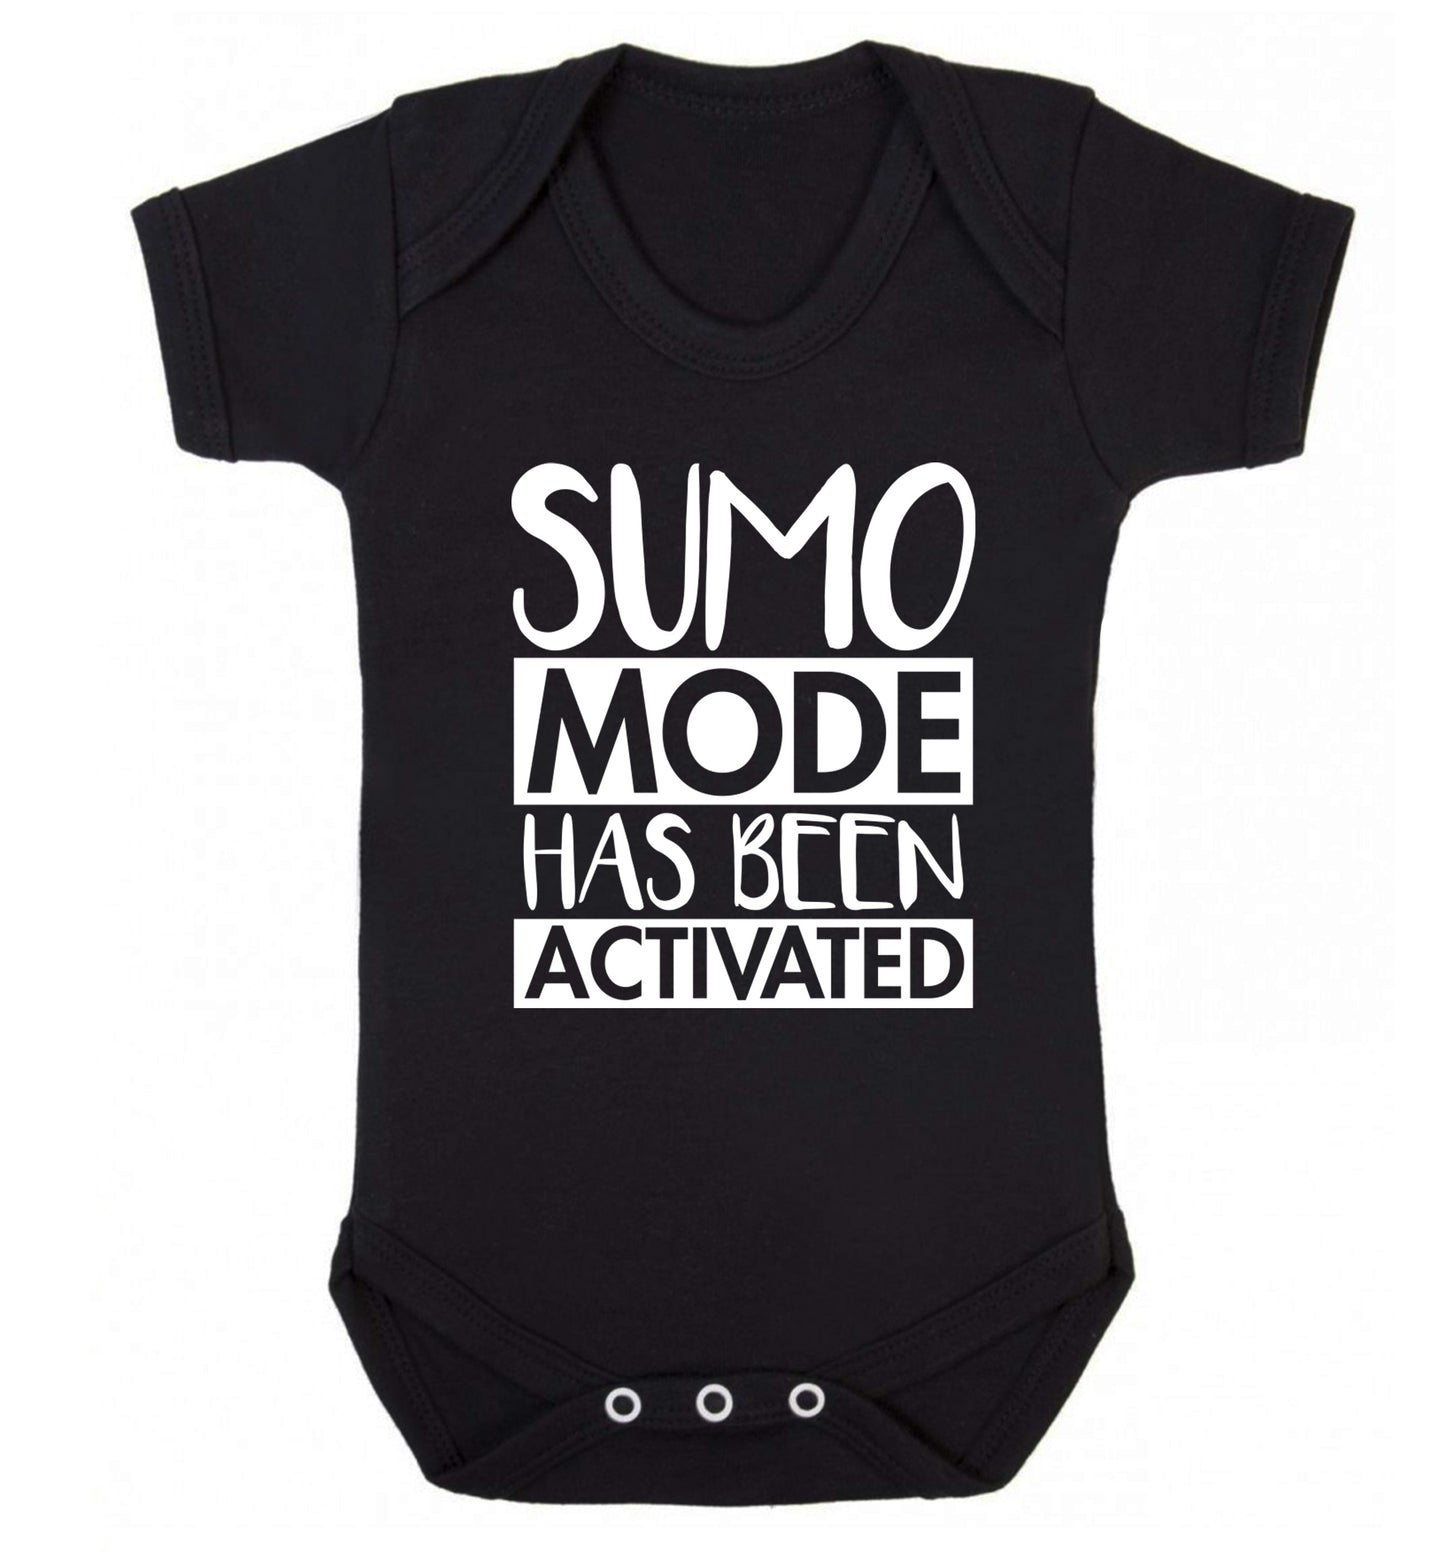 Sumo mode activated Baby Vest black 18-24 months